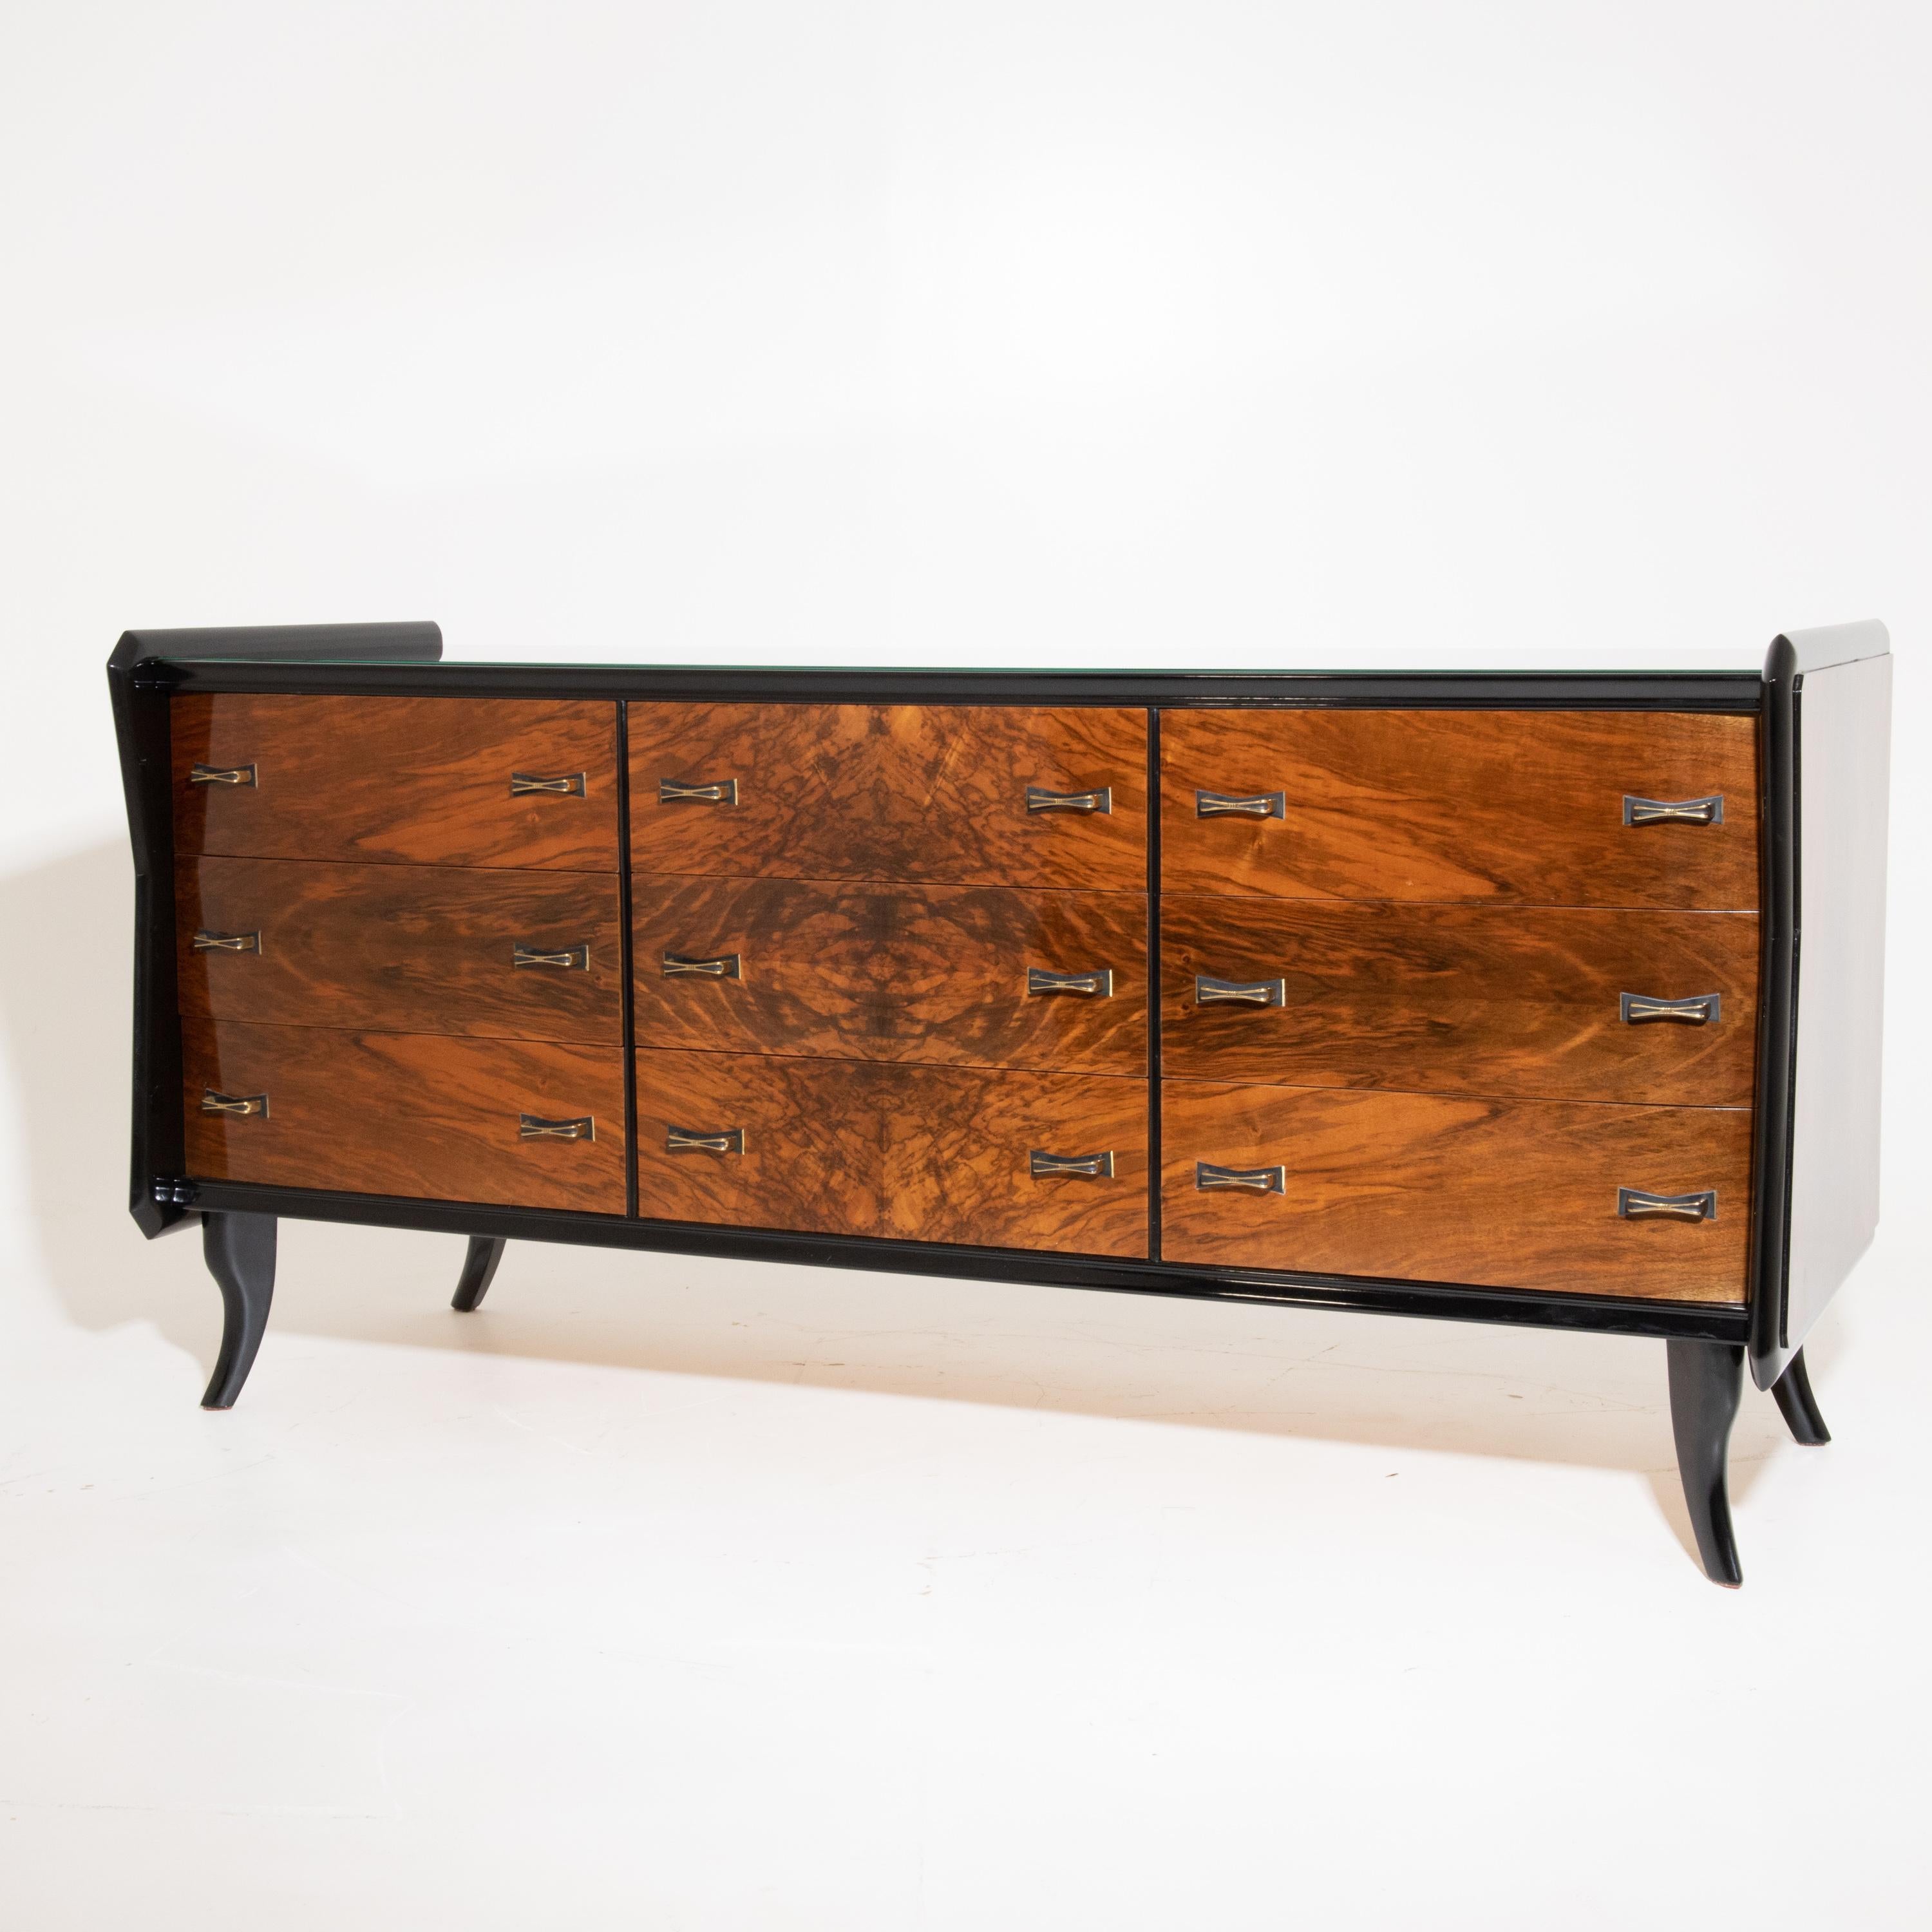 Partly ebonized sideboard with nine drawers standing on flared feet. The handles are x-shaped and made of brass. The front shows a very nice walnut veneer pattern. The two-door bedside cabinets (56 x 50 x 35.5 cm) are also available and have a